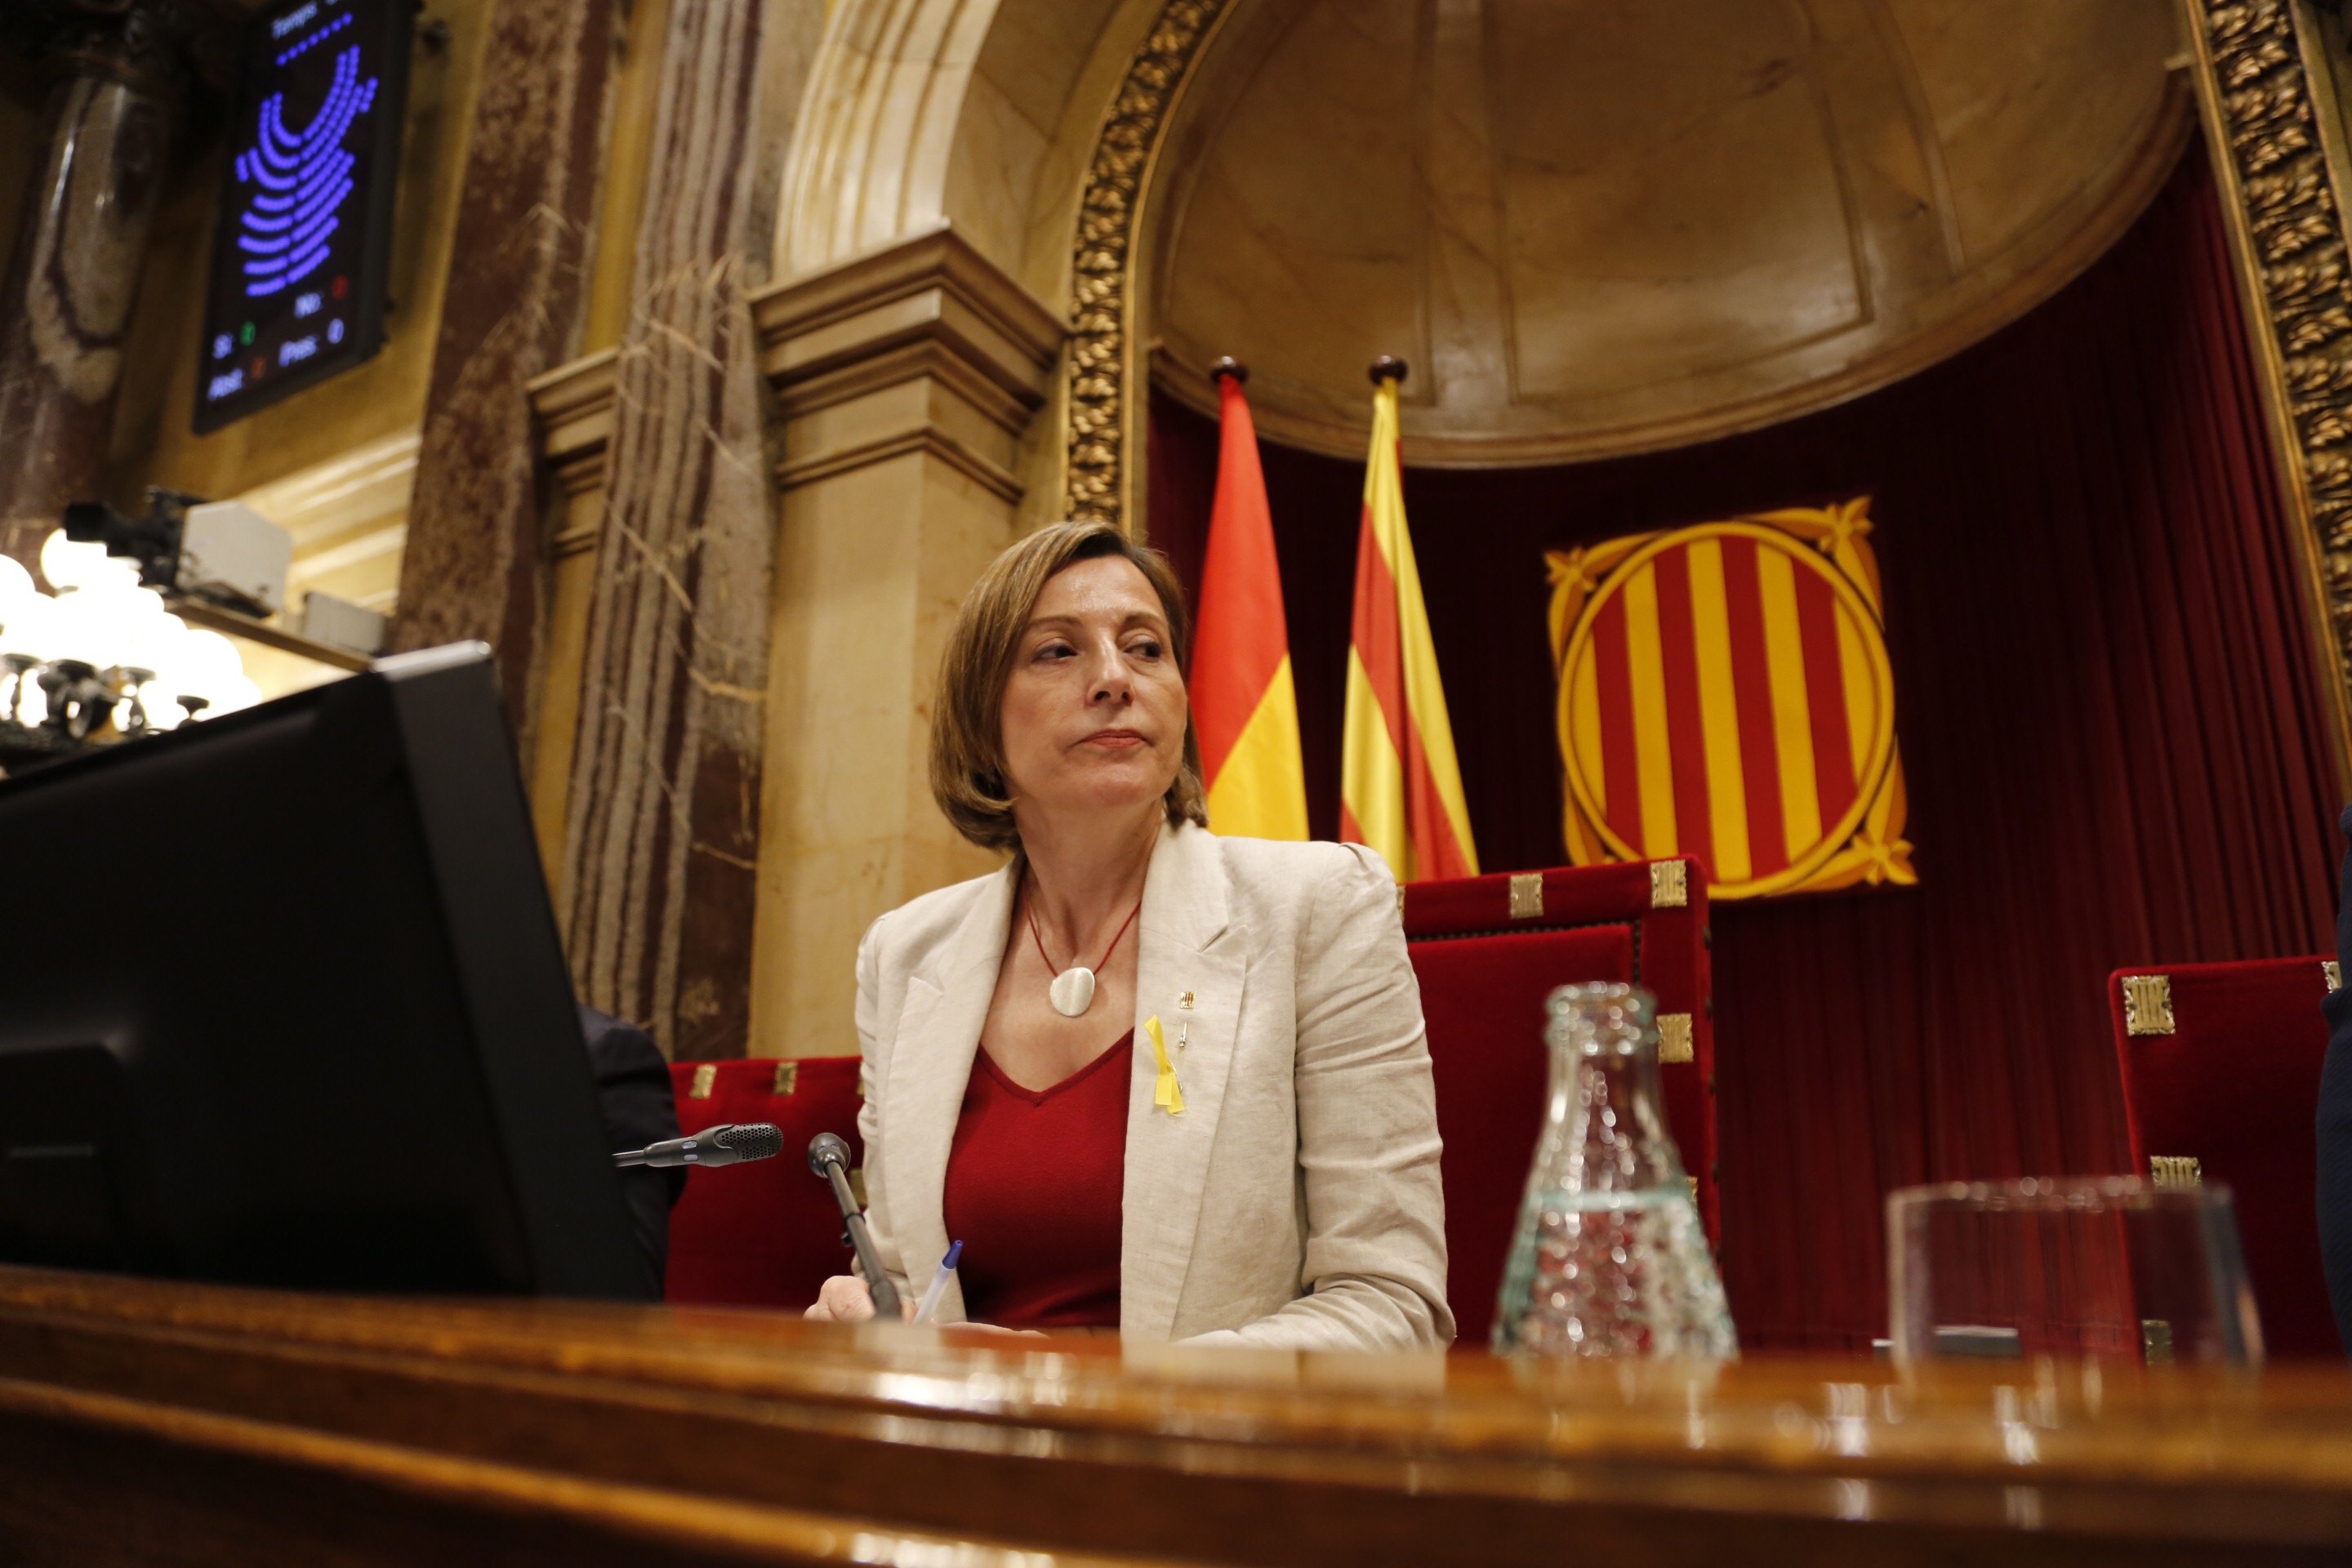 Parliament speaker Forcadell, 4th on ERC's electoral list